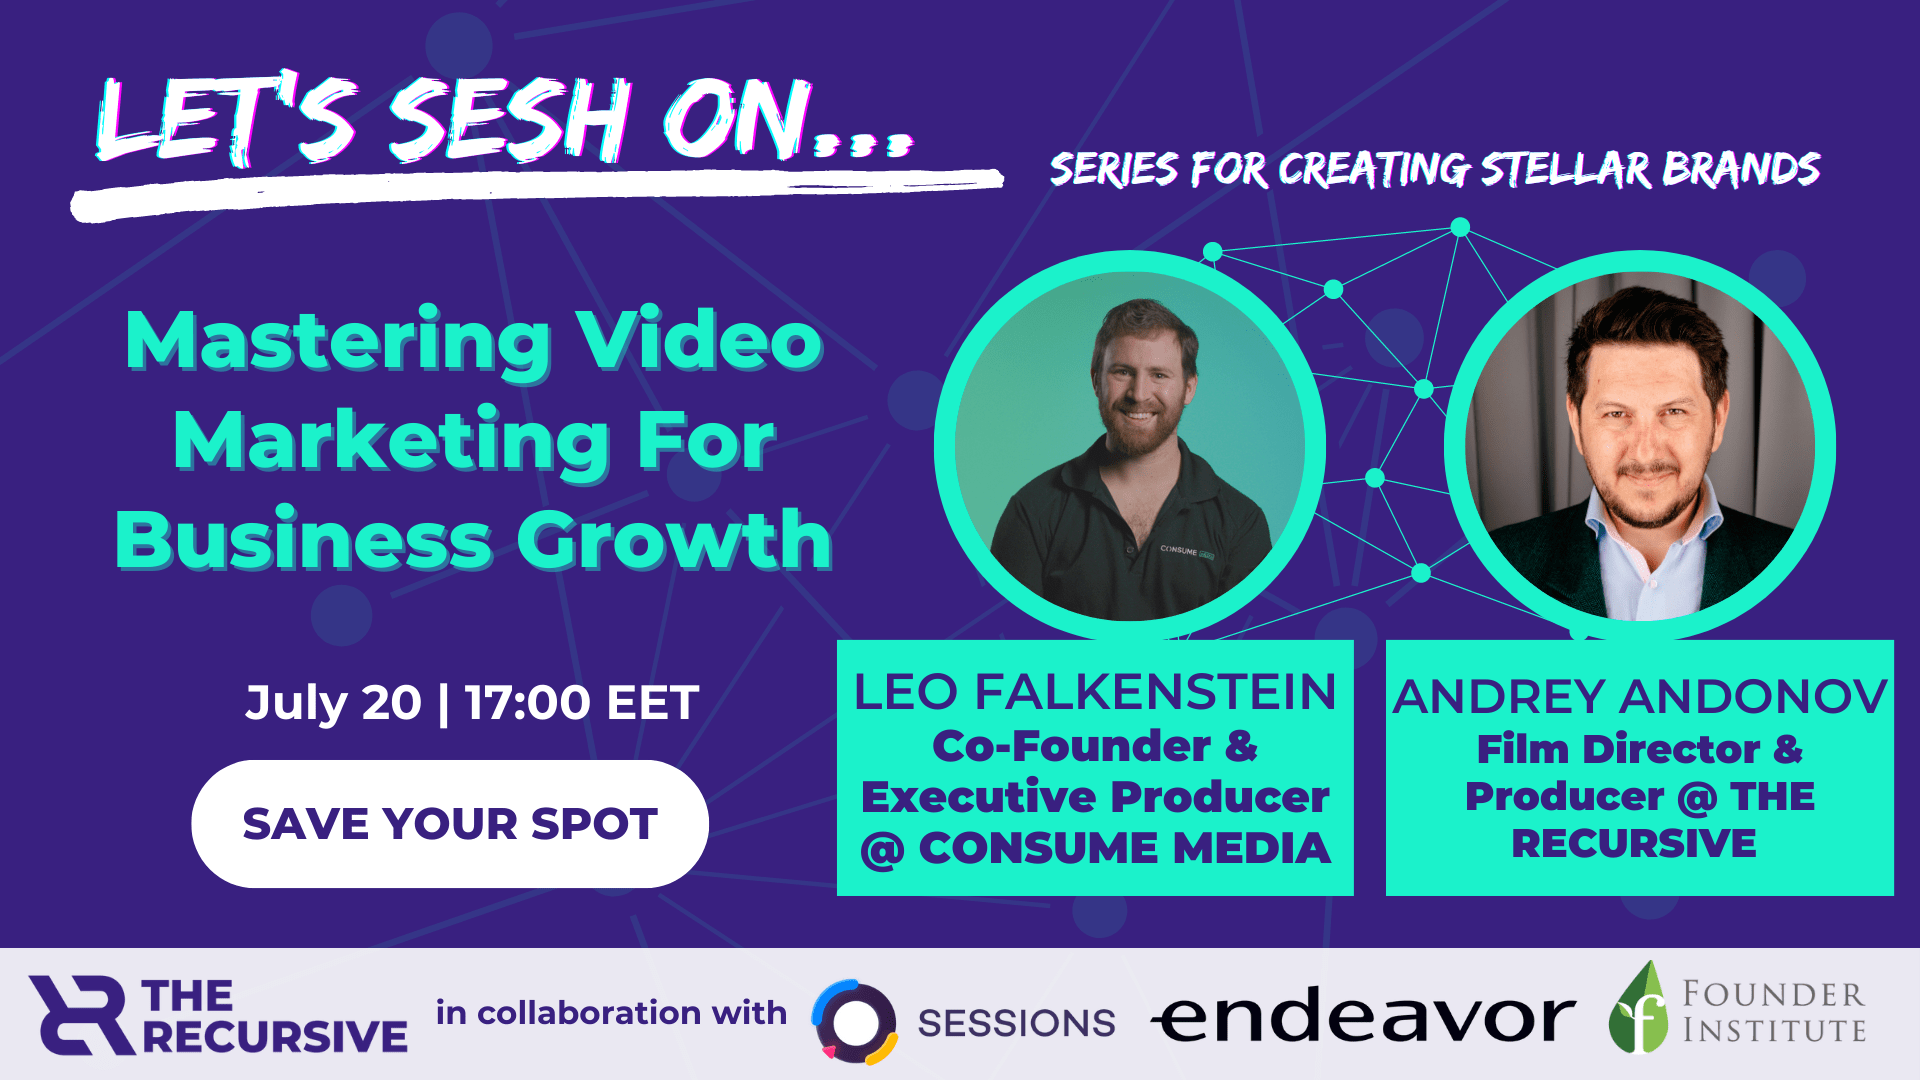 Mastering Video Marketing For Business Growth Webinar